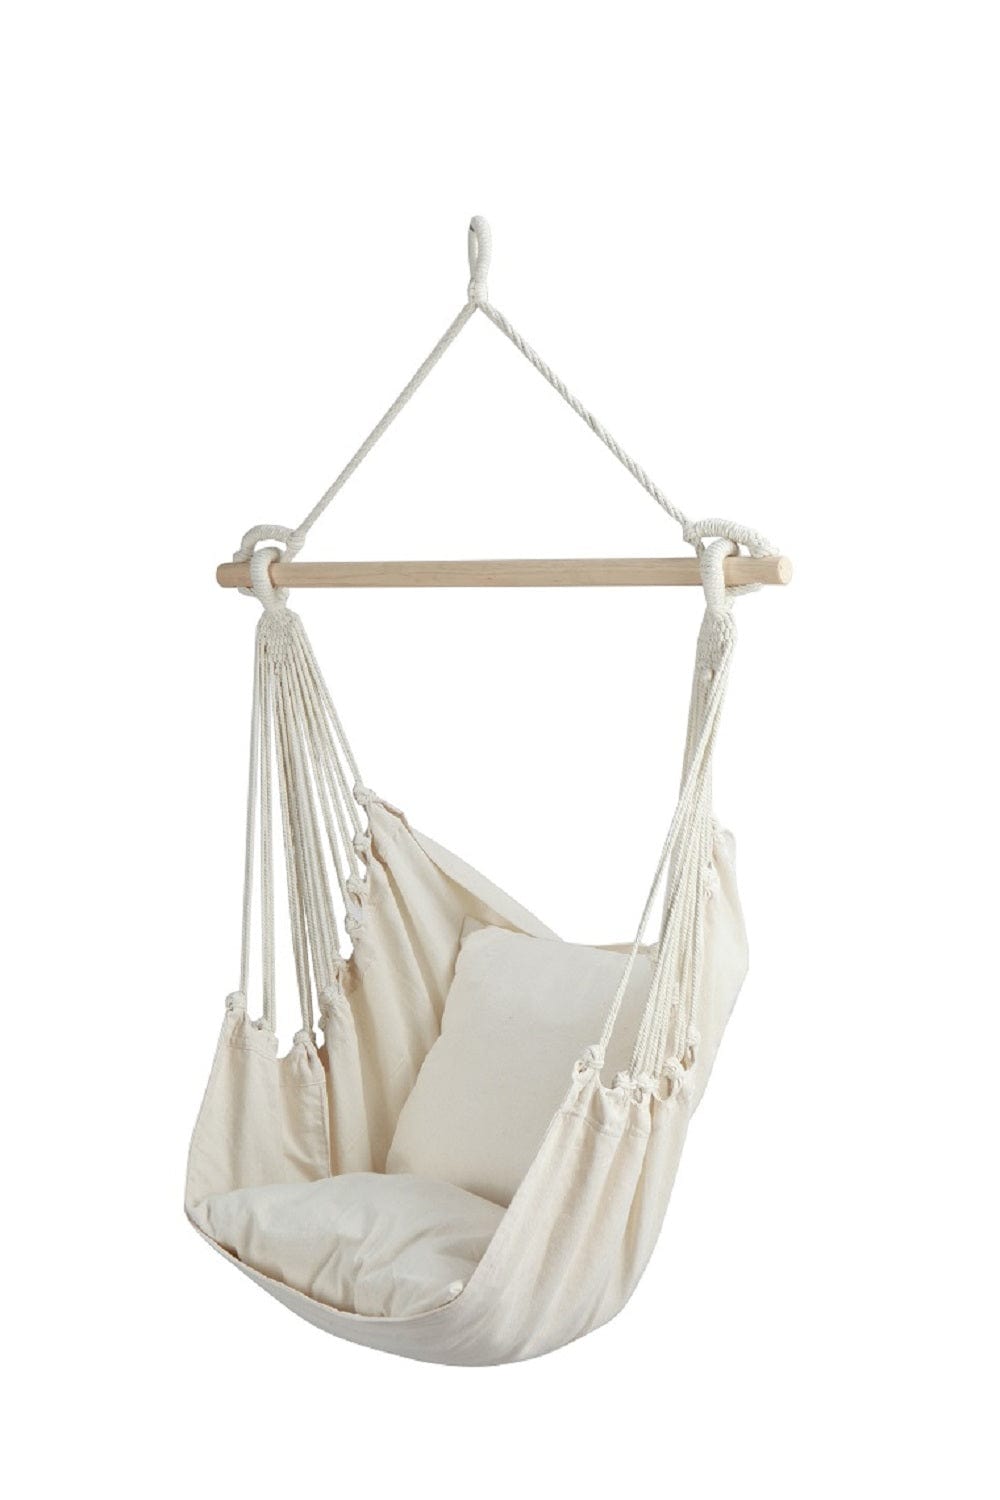 Cotton Swing Chair With Cushions Natural Oatmeal, Weight Capacity of 115 kg- 100D X 100W X 130H cm